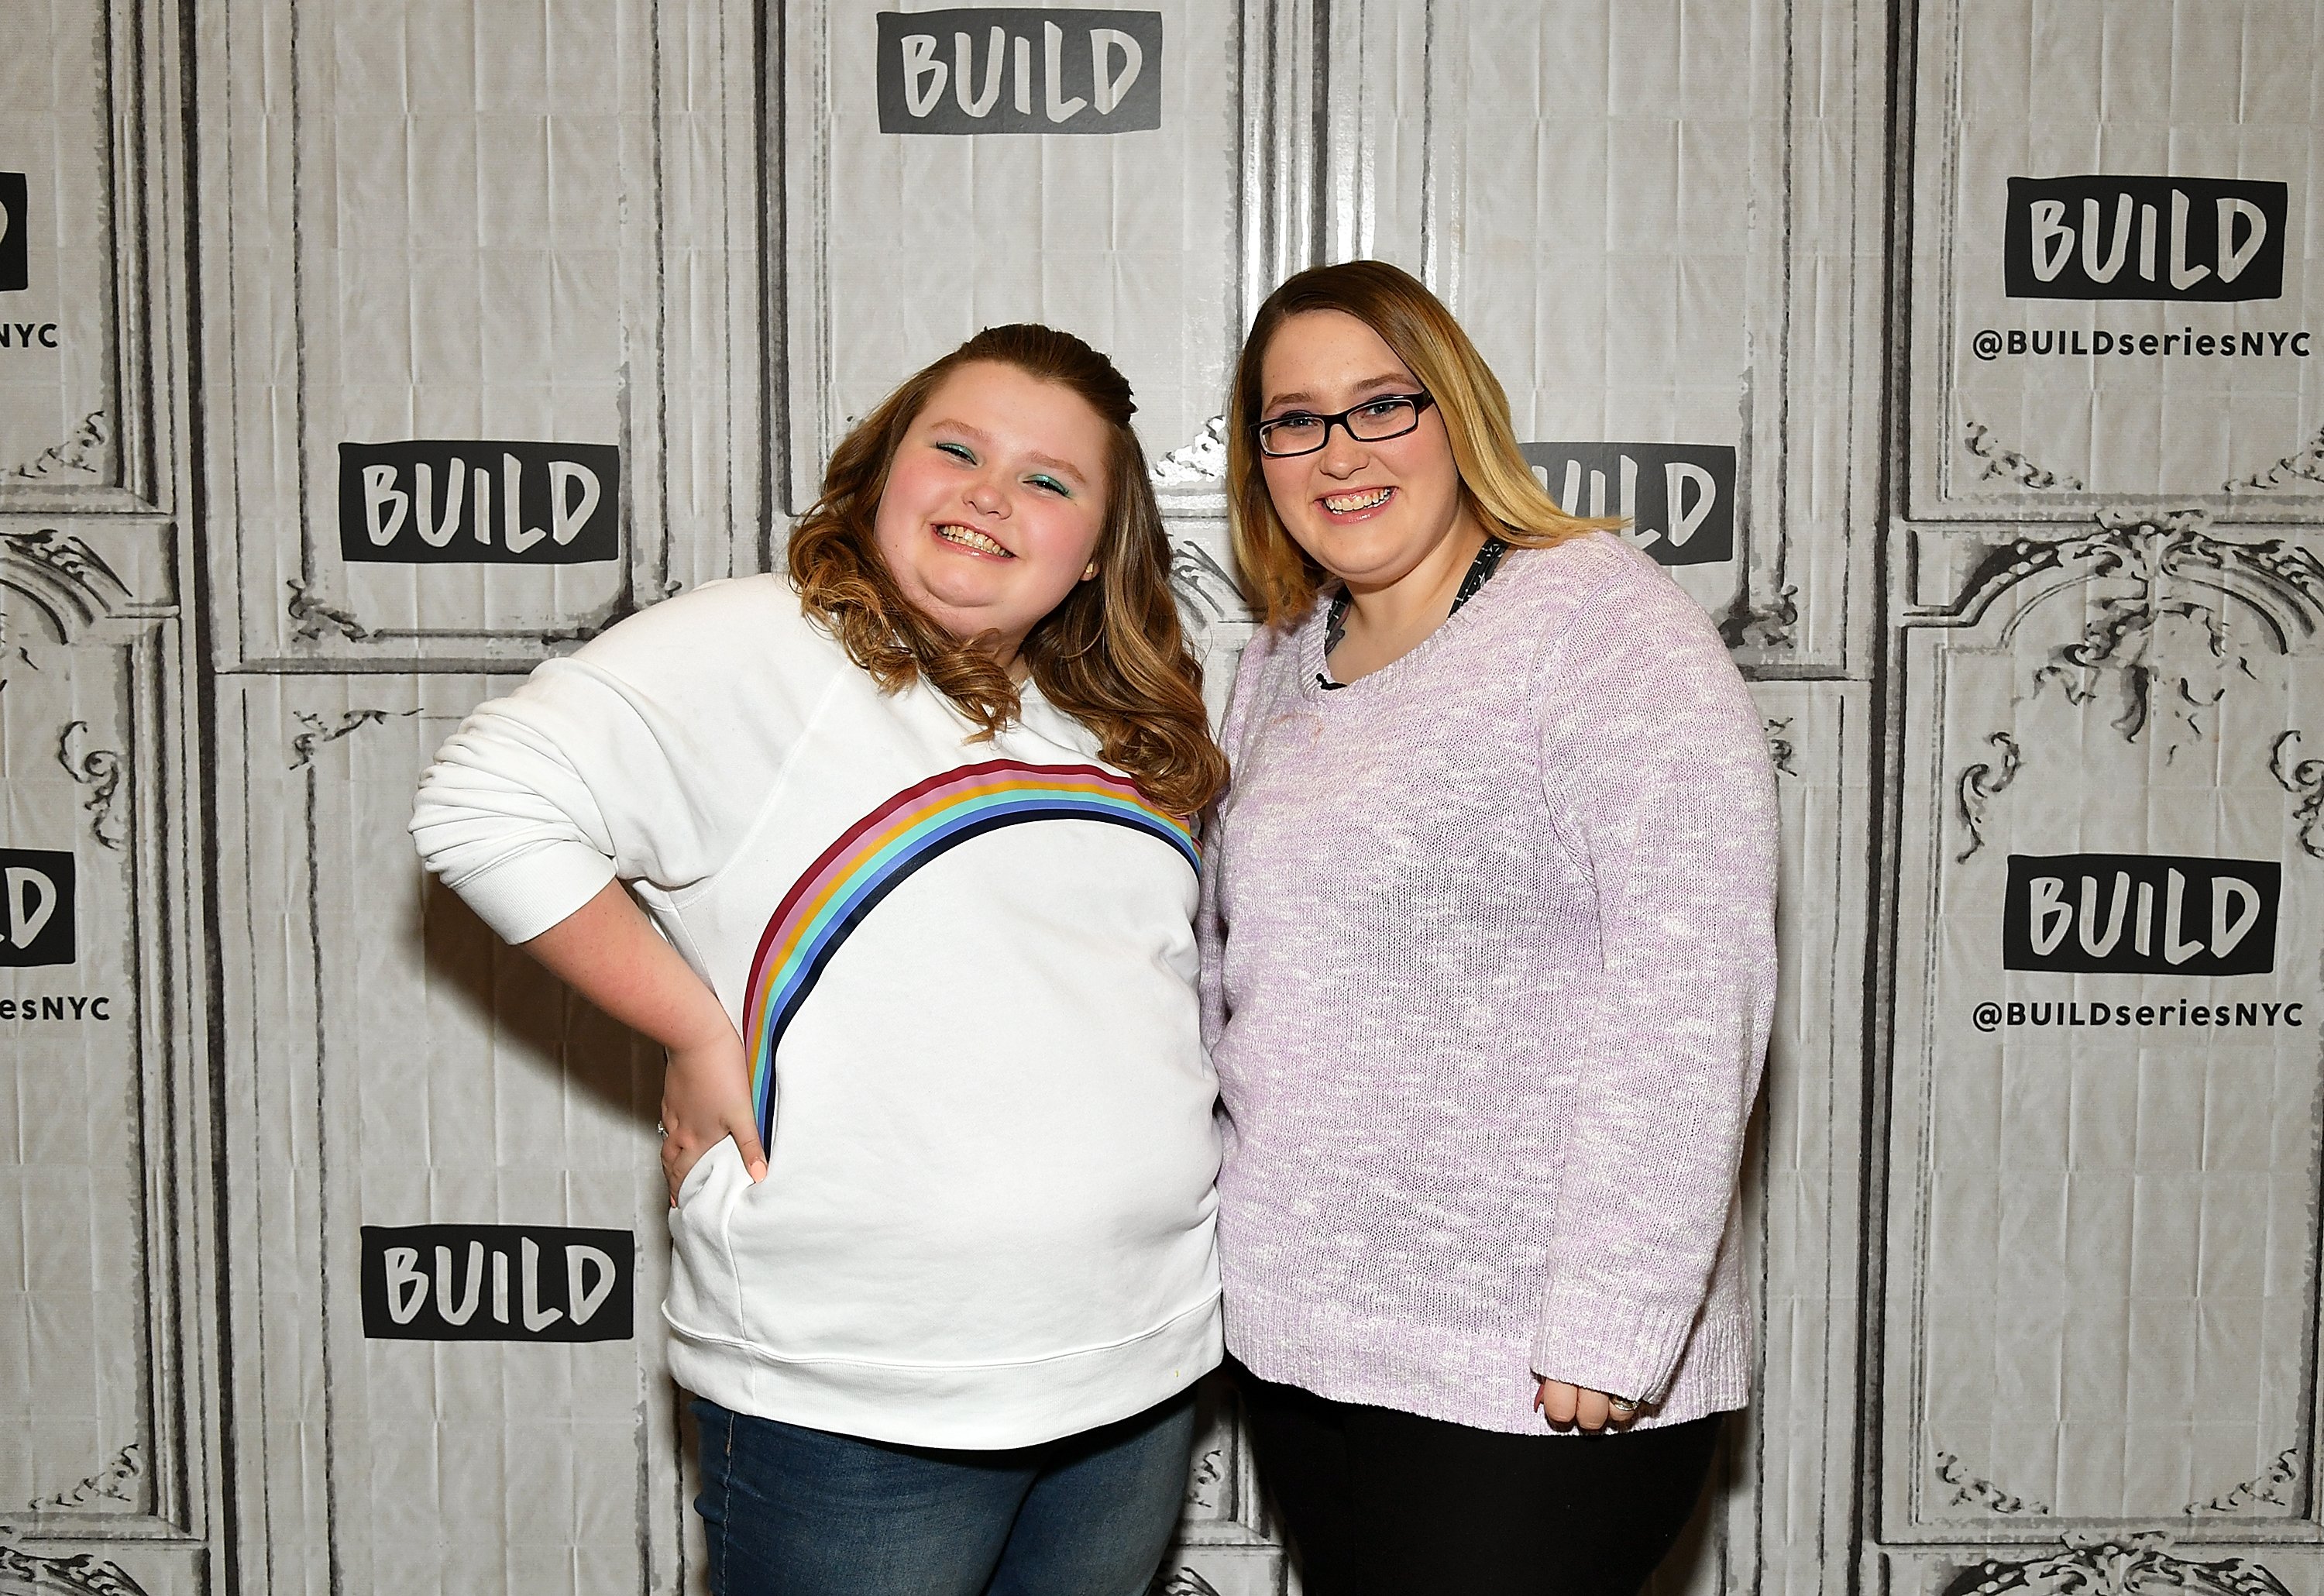 Alana "Honey Boo Boo" Thompson (L) and Lauryn "Pumpkin" Shannon from TLC's reality TV series "Here Comes Honey Boo Boo" attend Build Brunch at Build Studio on March 14, 2019 in New York City. | Source: Getty Images